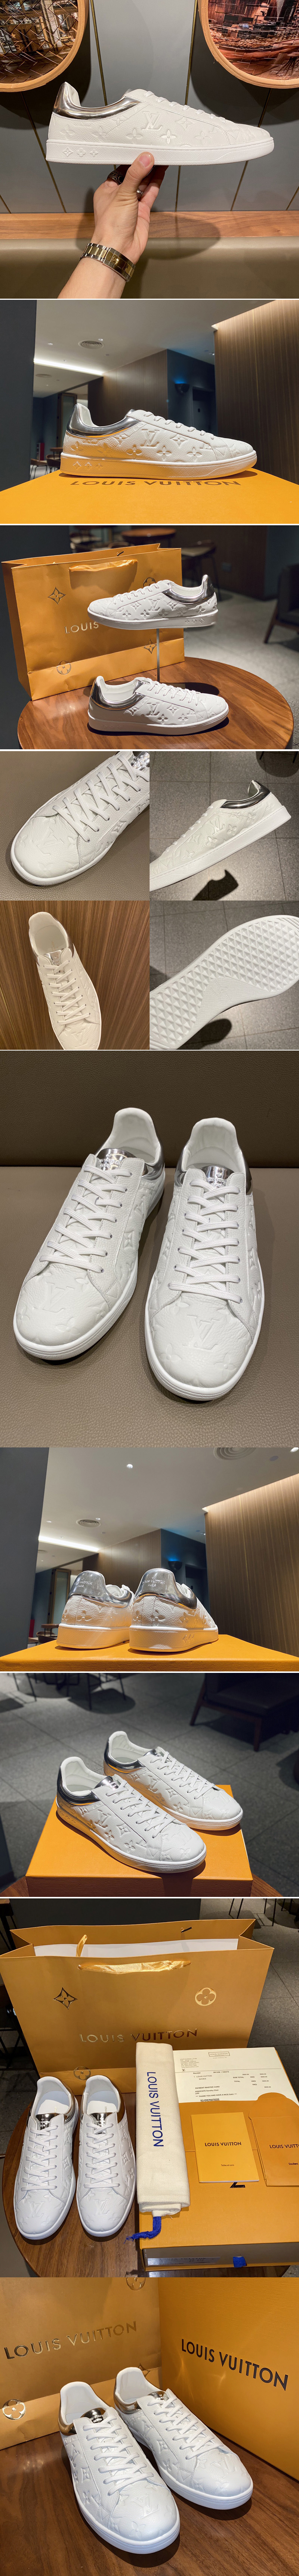 Replica Louis Vuitton 1A80XH Luxembourg sneaker in White Monogram-embossed grained calf leather